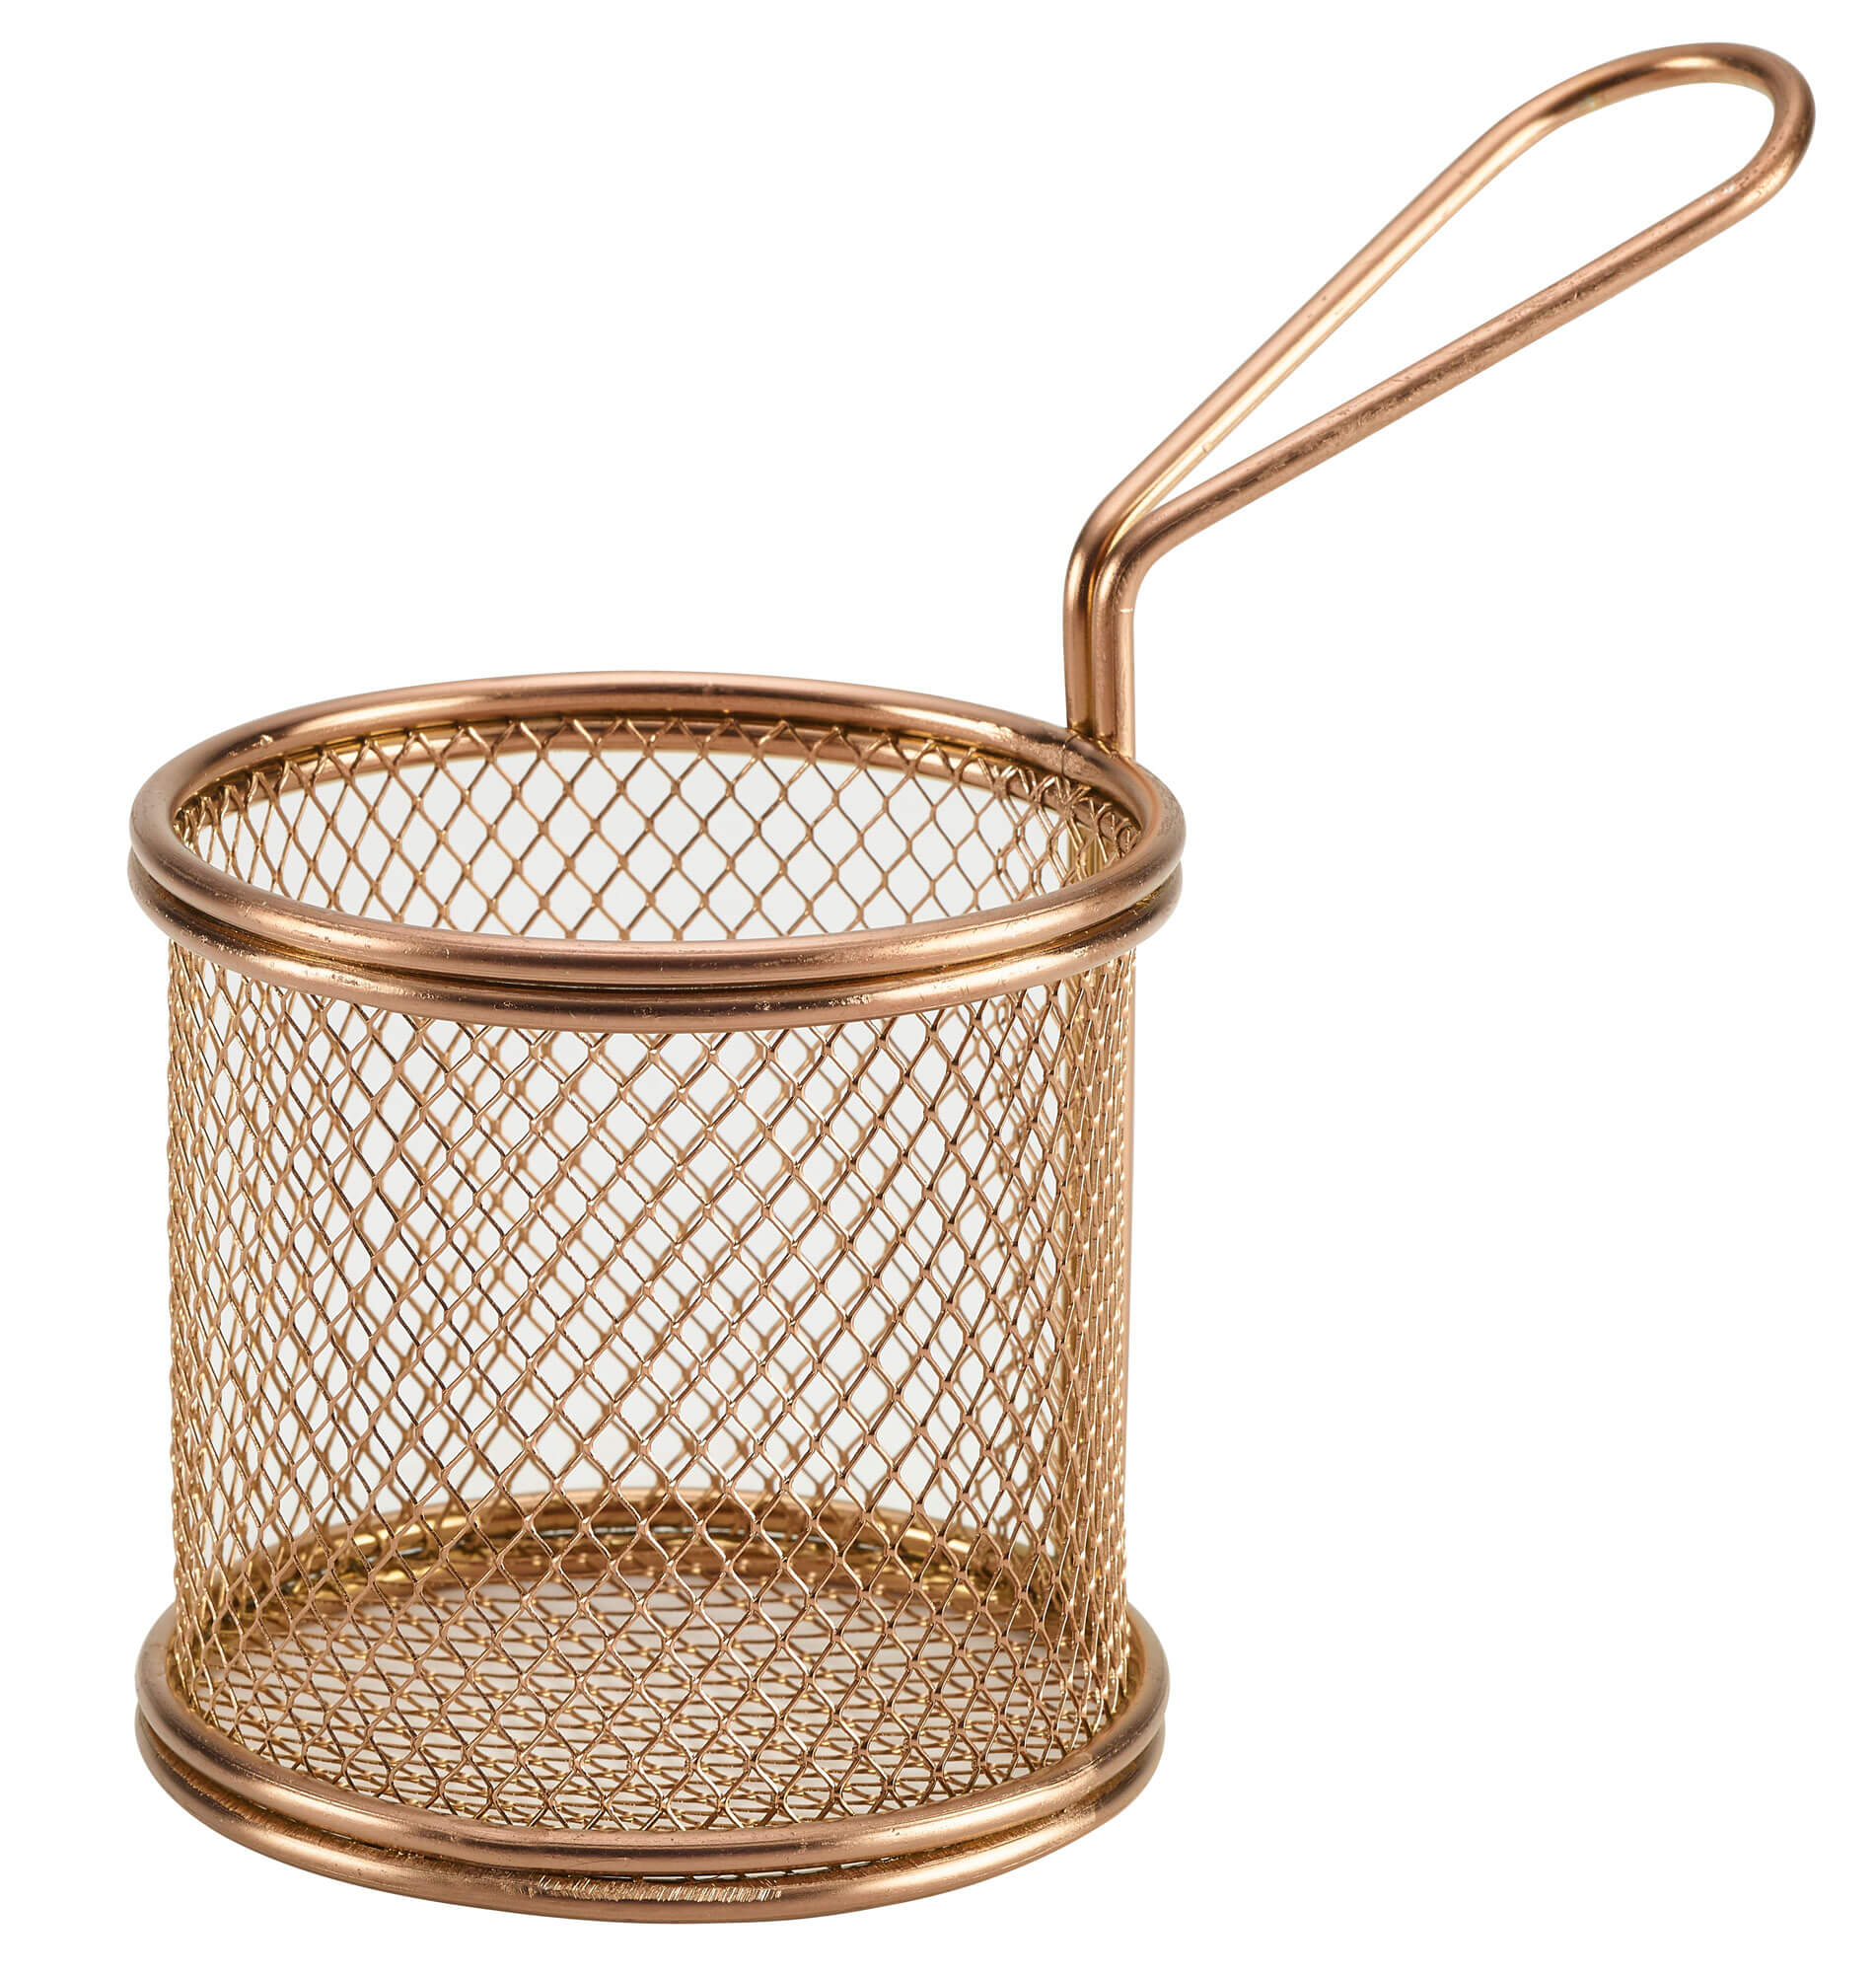 Fry basket stainless steel, round, copper-colored - 9,3x9cm